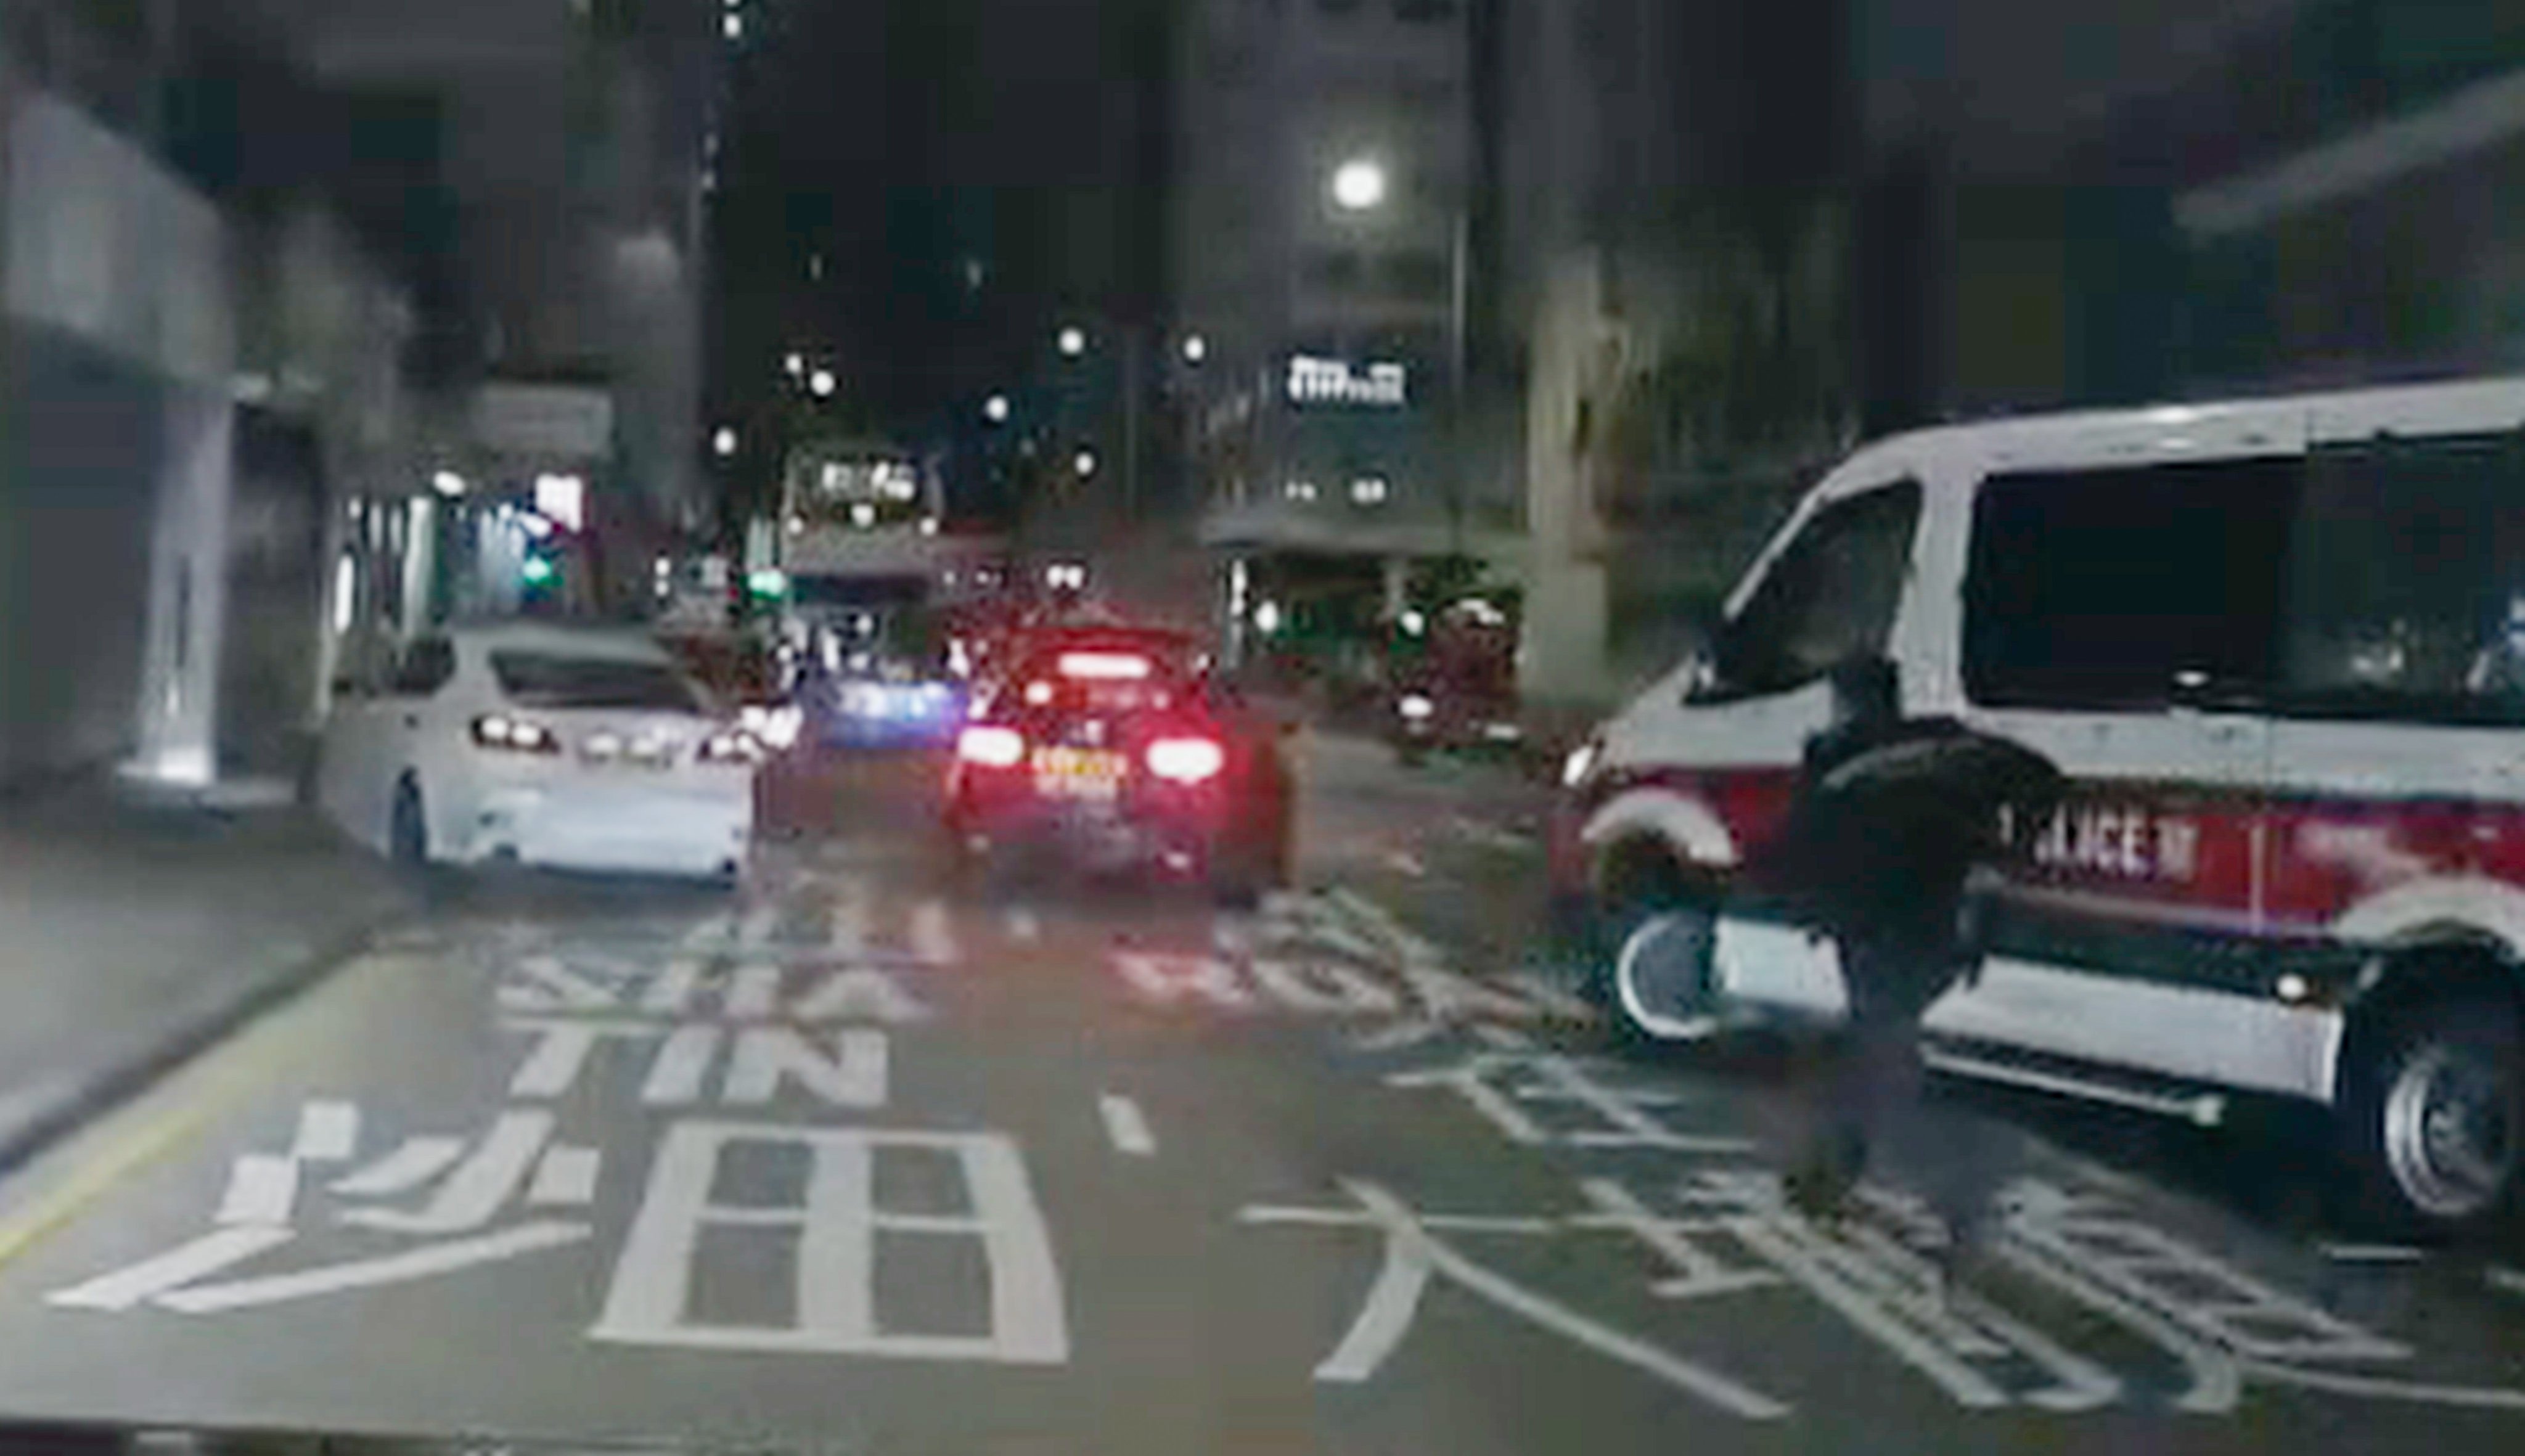 Hong Kong police have launched a manhunt for a hit-and-run driver after a pedestrian suffered serious injuries when she was struck by a white car (left) on Thursday night. Photo: Handout